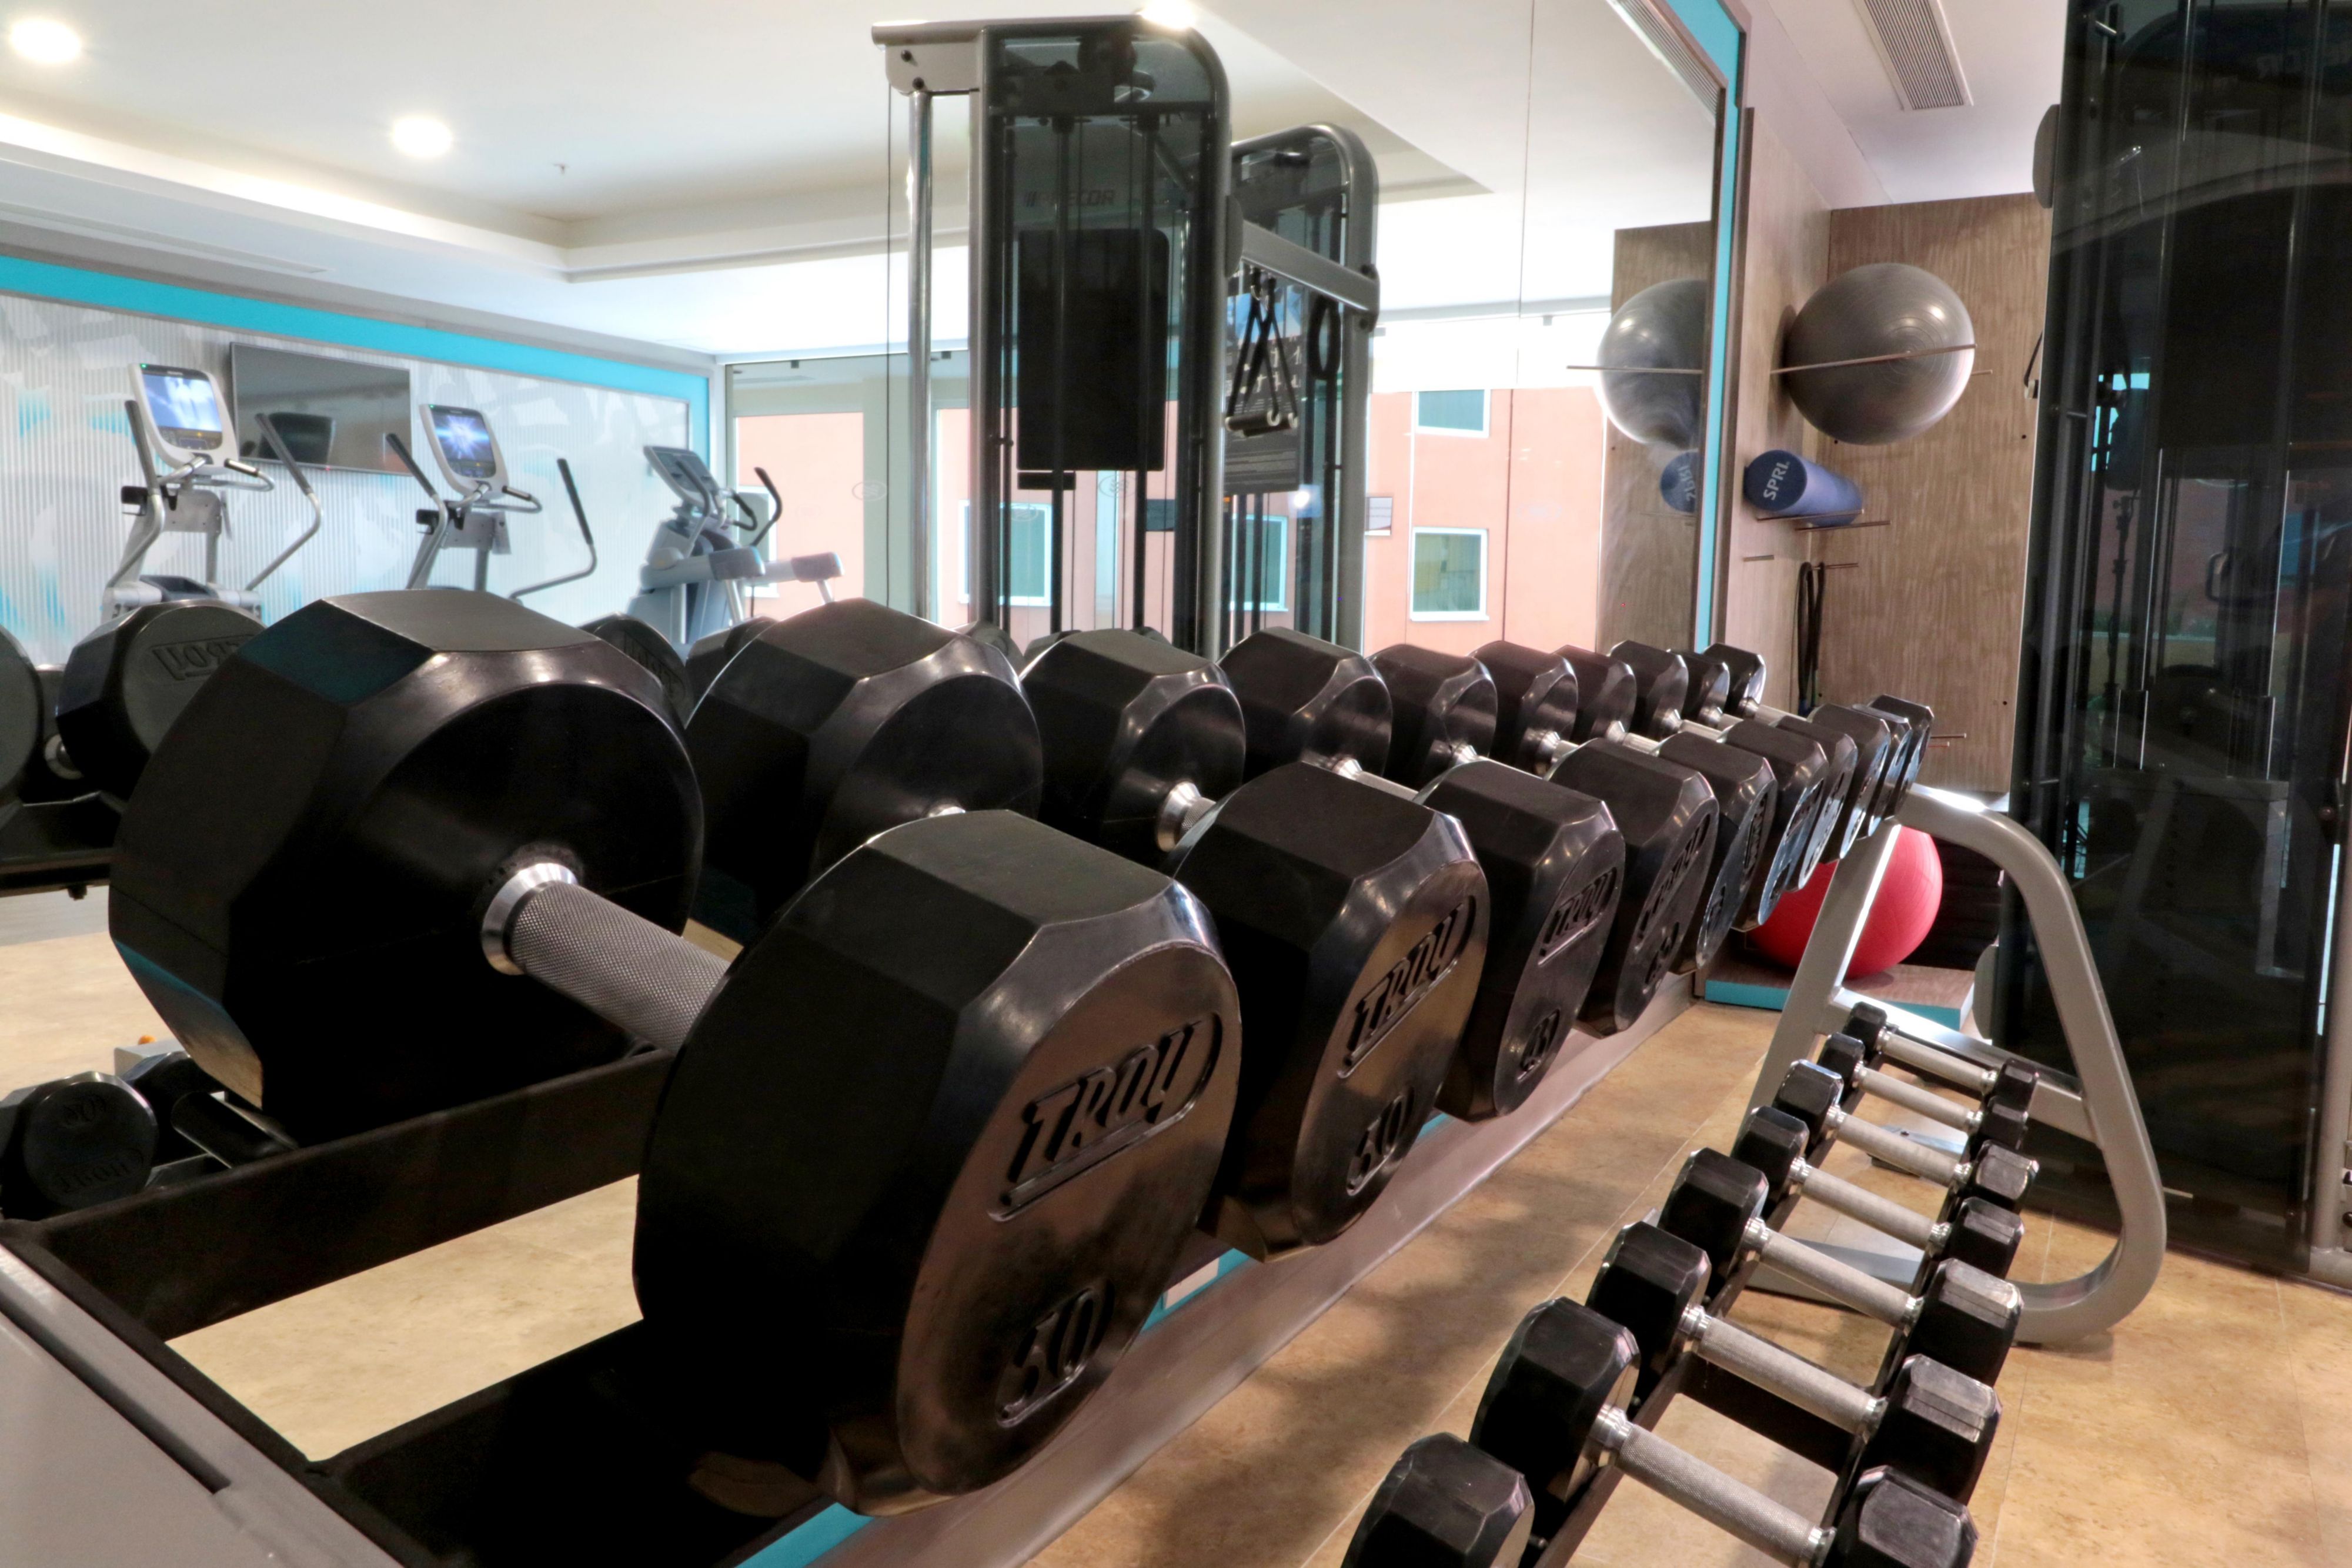 Continue your workout regimen in our 24 hour fitness center